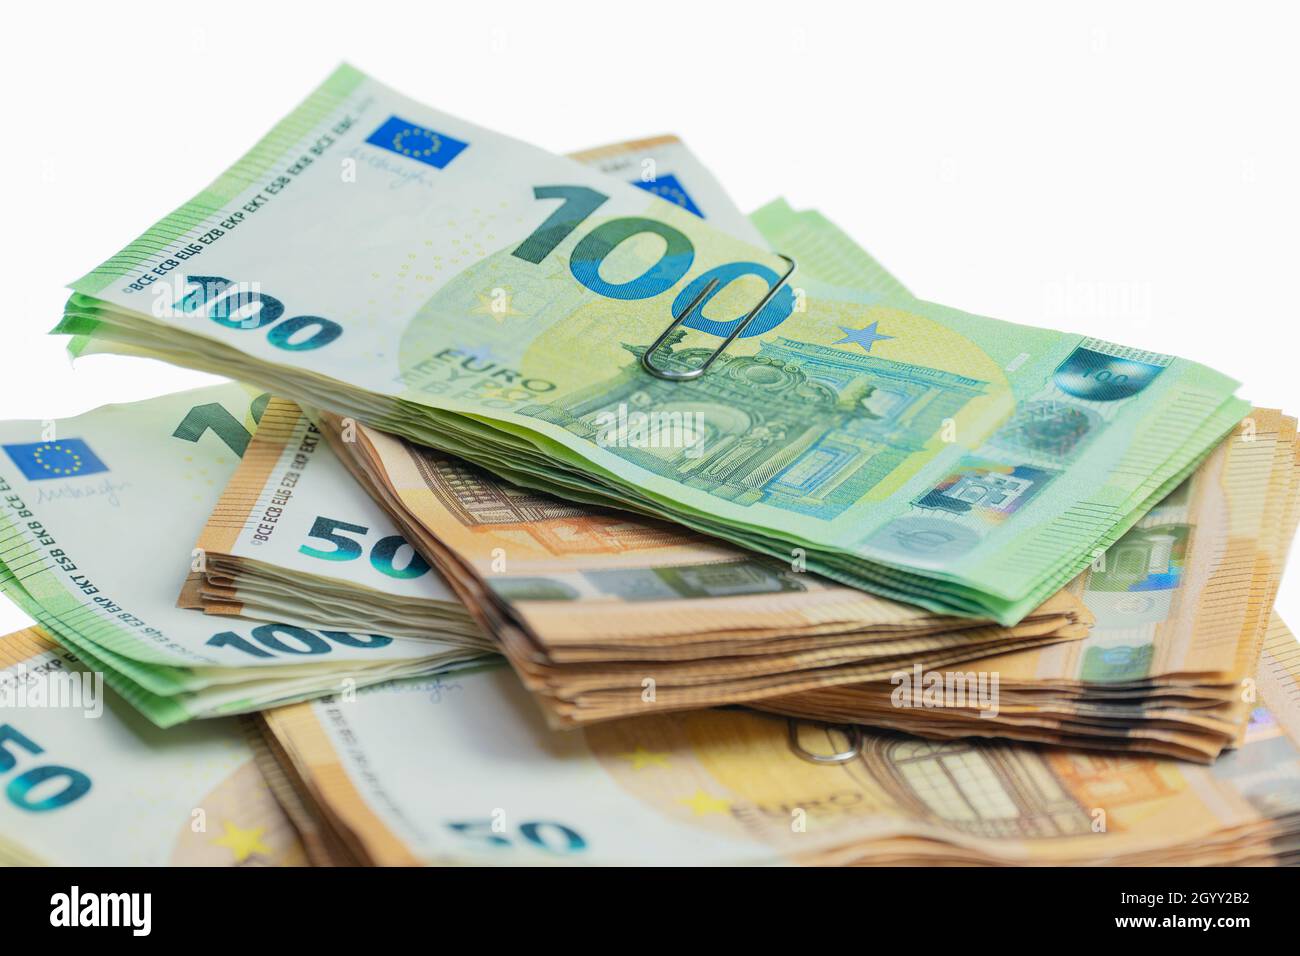 A stack of bundled euro banknotes Stock Photo